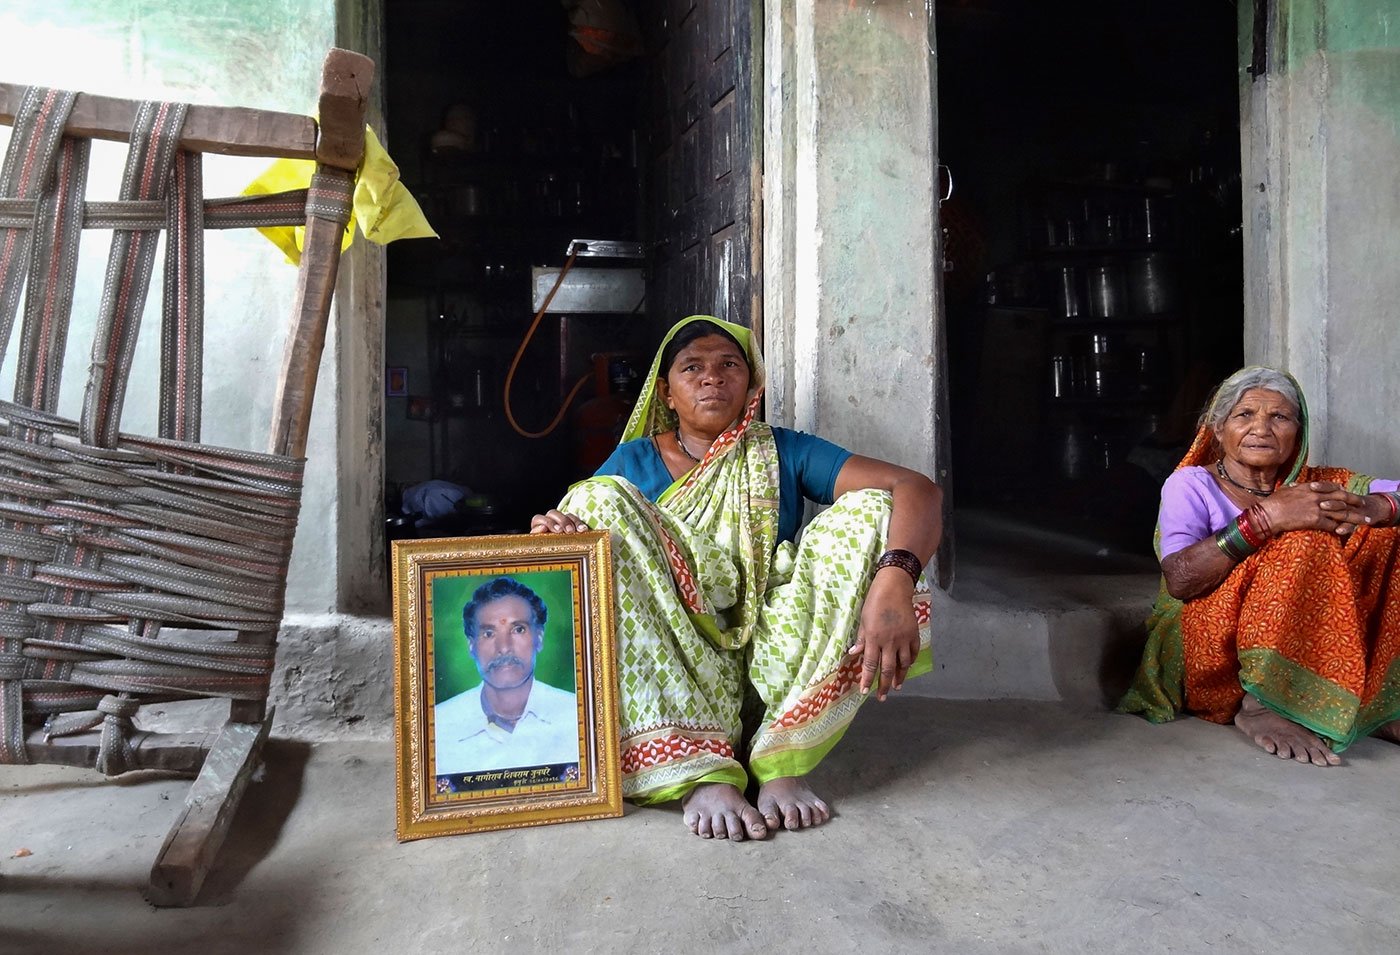 T1’s last victim on August 28, 2018, was Nagorao Junghare, a farmer and herder in Pimpalshenda village that falls in Kalamb tehsil along the Ralegaon tehsil’s border in Yavatmal district. His widow, Renukabai, is still to come to terms with her husband’s death in T1’s attack. She’s at their hut here.